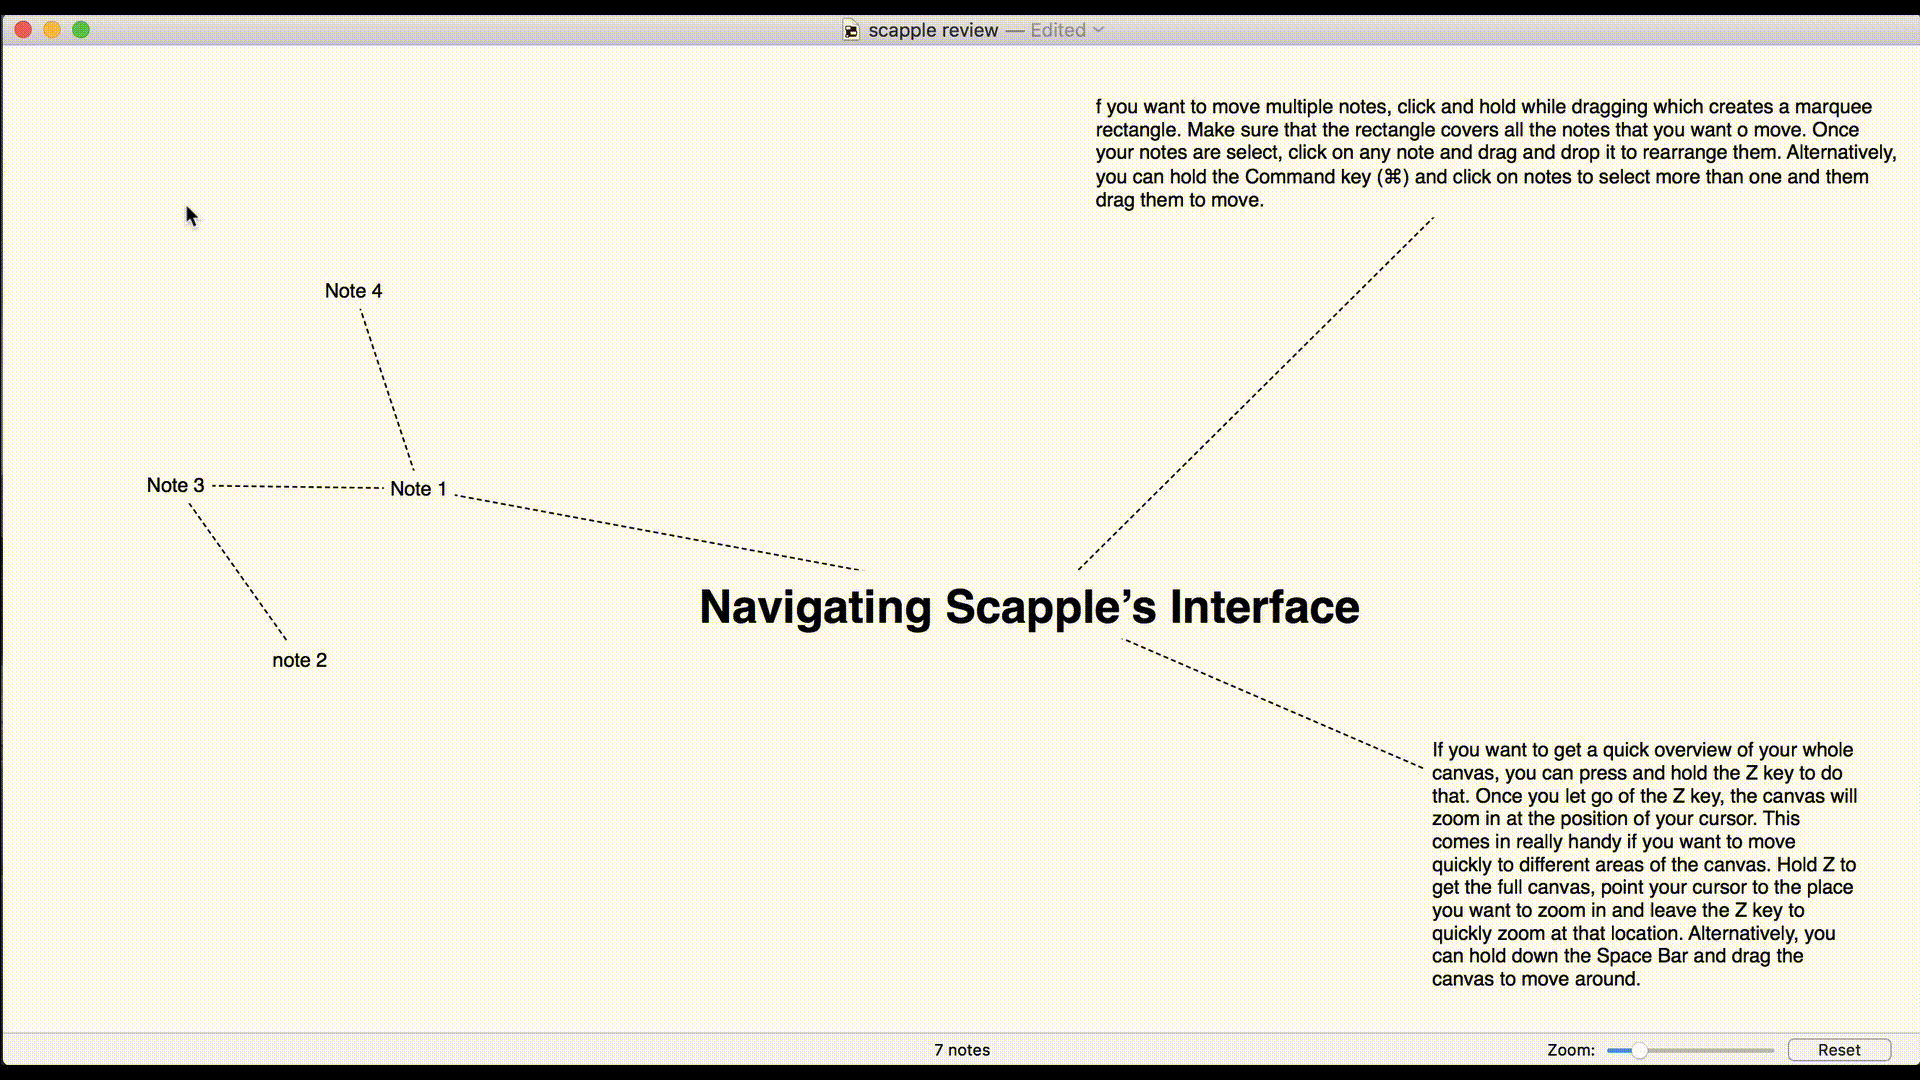 5. Navigating Scapple’s Interface 2